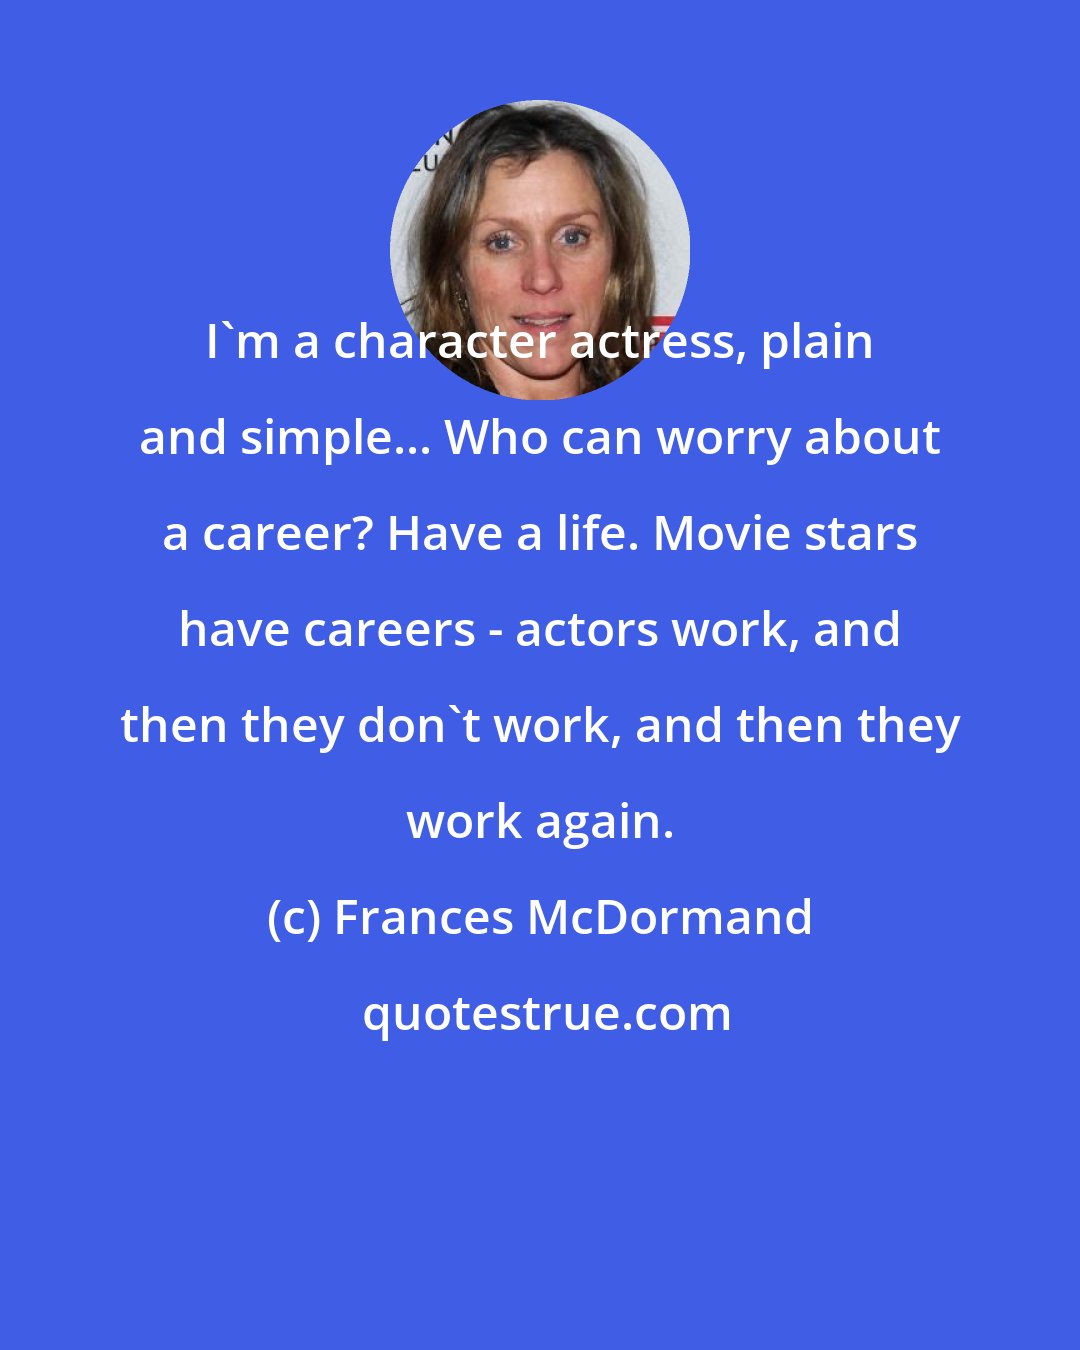 Frances McDormand: I'm a character actress, plain and simple... Who can worry about a career? Have a life. Movie stars have careers - actors work, and then they don't work, and then they work again.